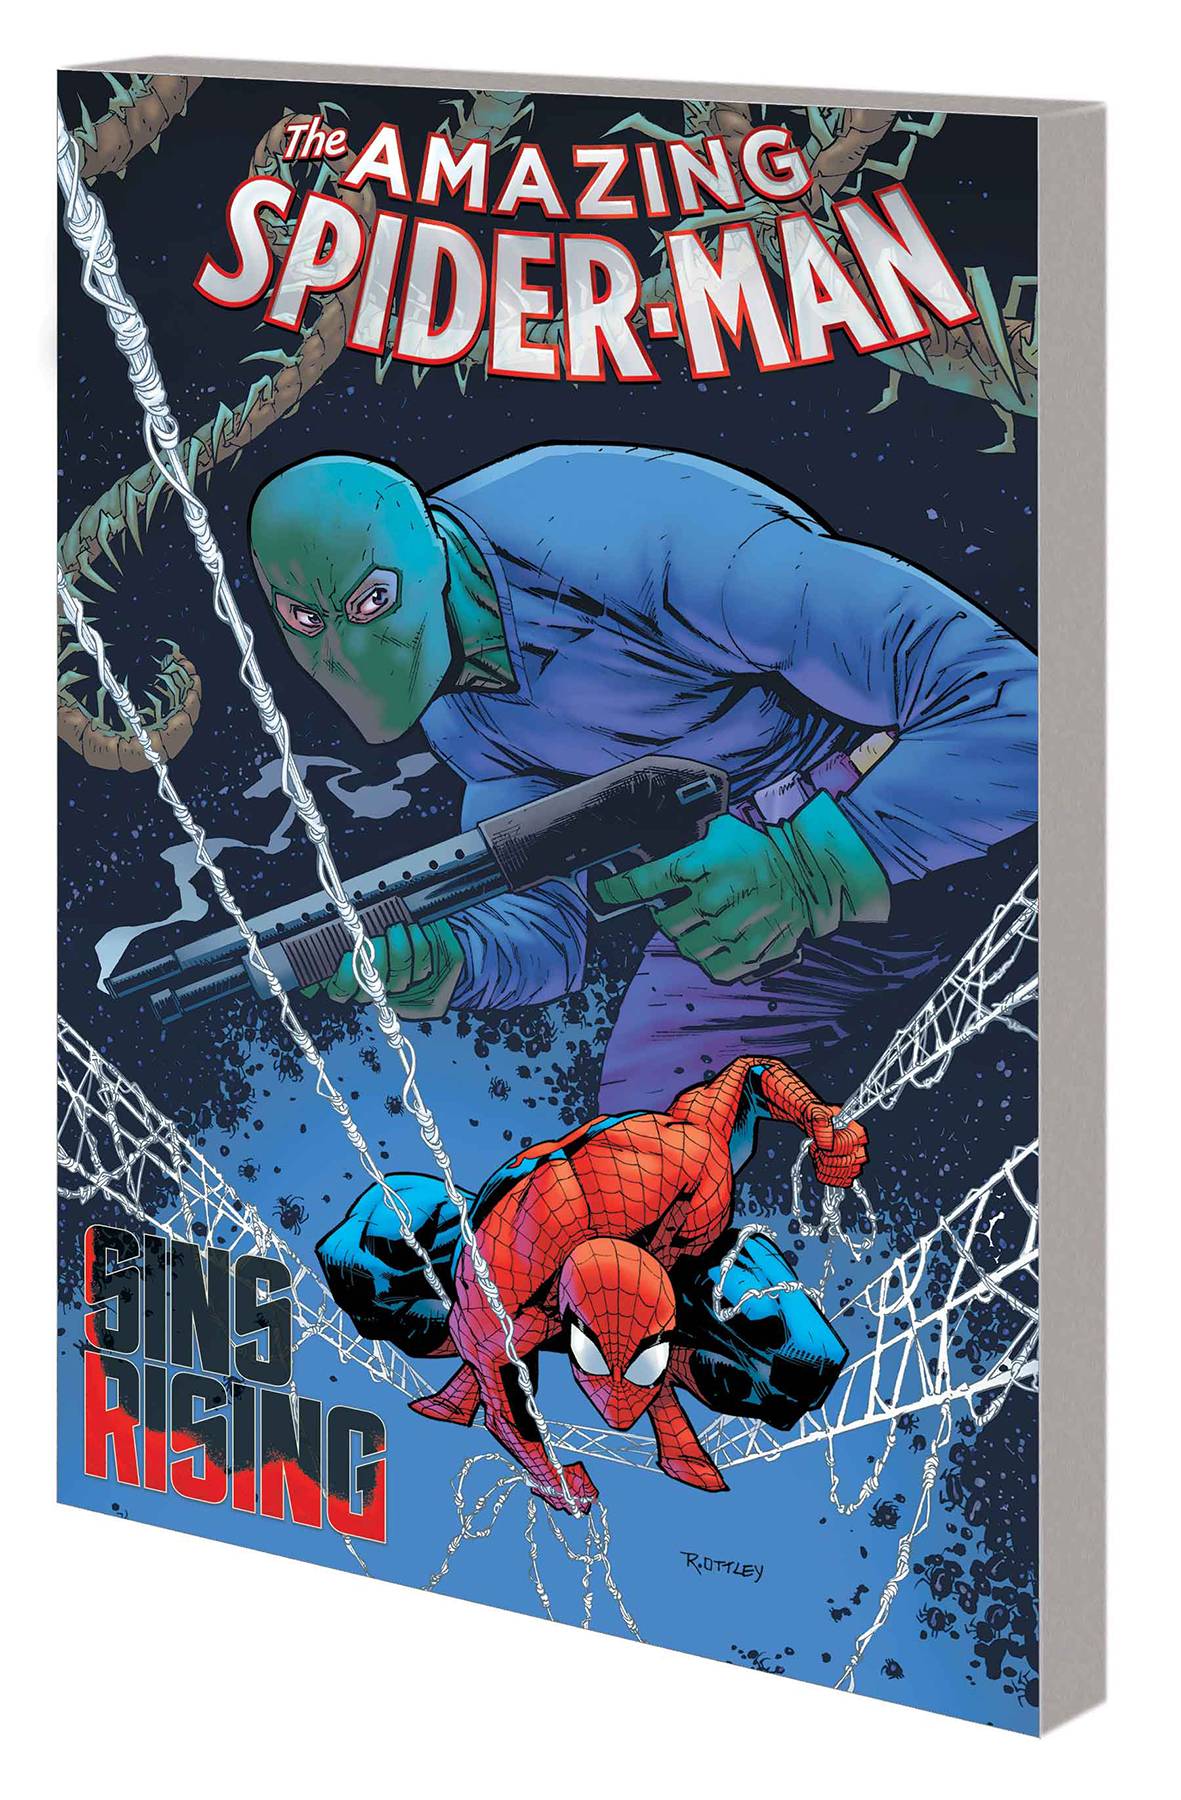 Amazing Spider-Man by Nick Spencer TP vol 09 Sins Rising - Silver Snail